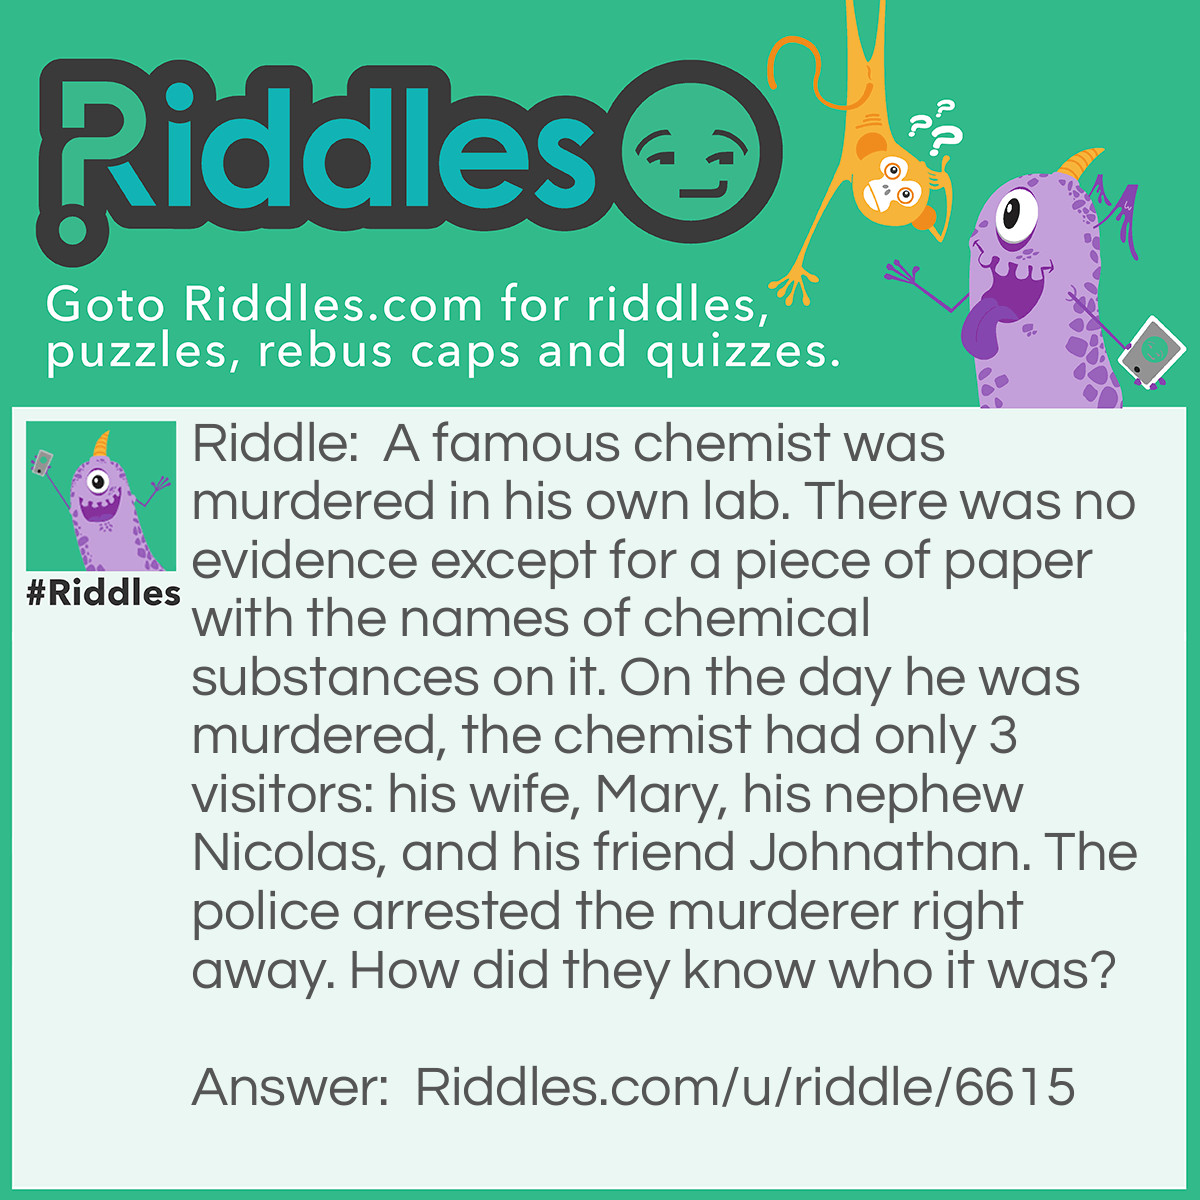 Riddle: A famous chemist was murdered in his own lab. There was no evidence except for a piece of paper with the names of chemical substances on it. On the day he was murdered, the chemist had only 3 visitors: his wife, Mary, his nephew Nicolas, and his friend Johnathan. The police arrested the murderer right away. How did they know who it was? Answer: The piece of paper had a clue on it. If you combine the short names of the chemical substances on the paper, you’ll get a name: Ni-C-O-La-S.